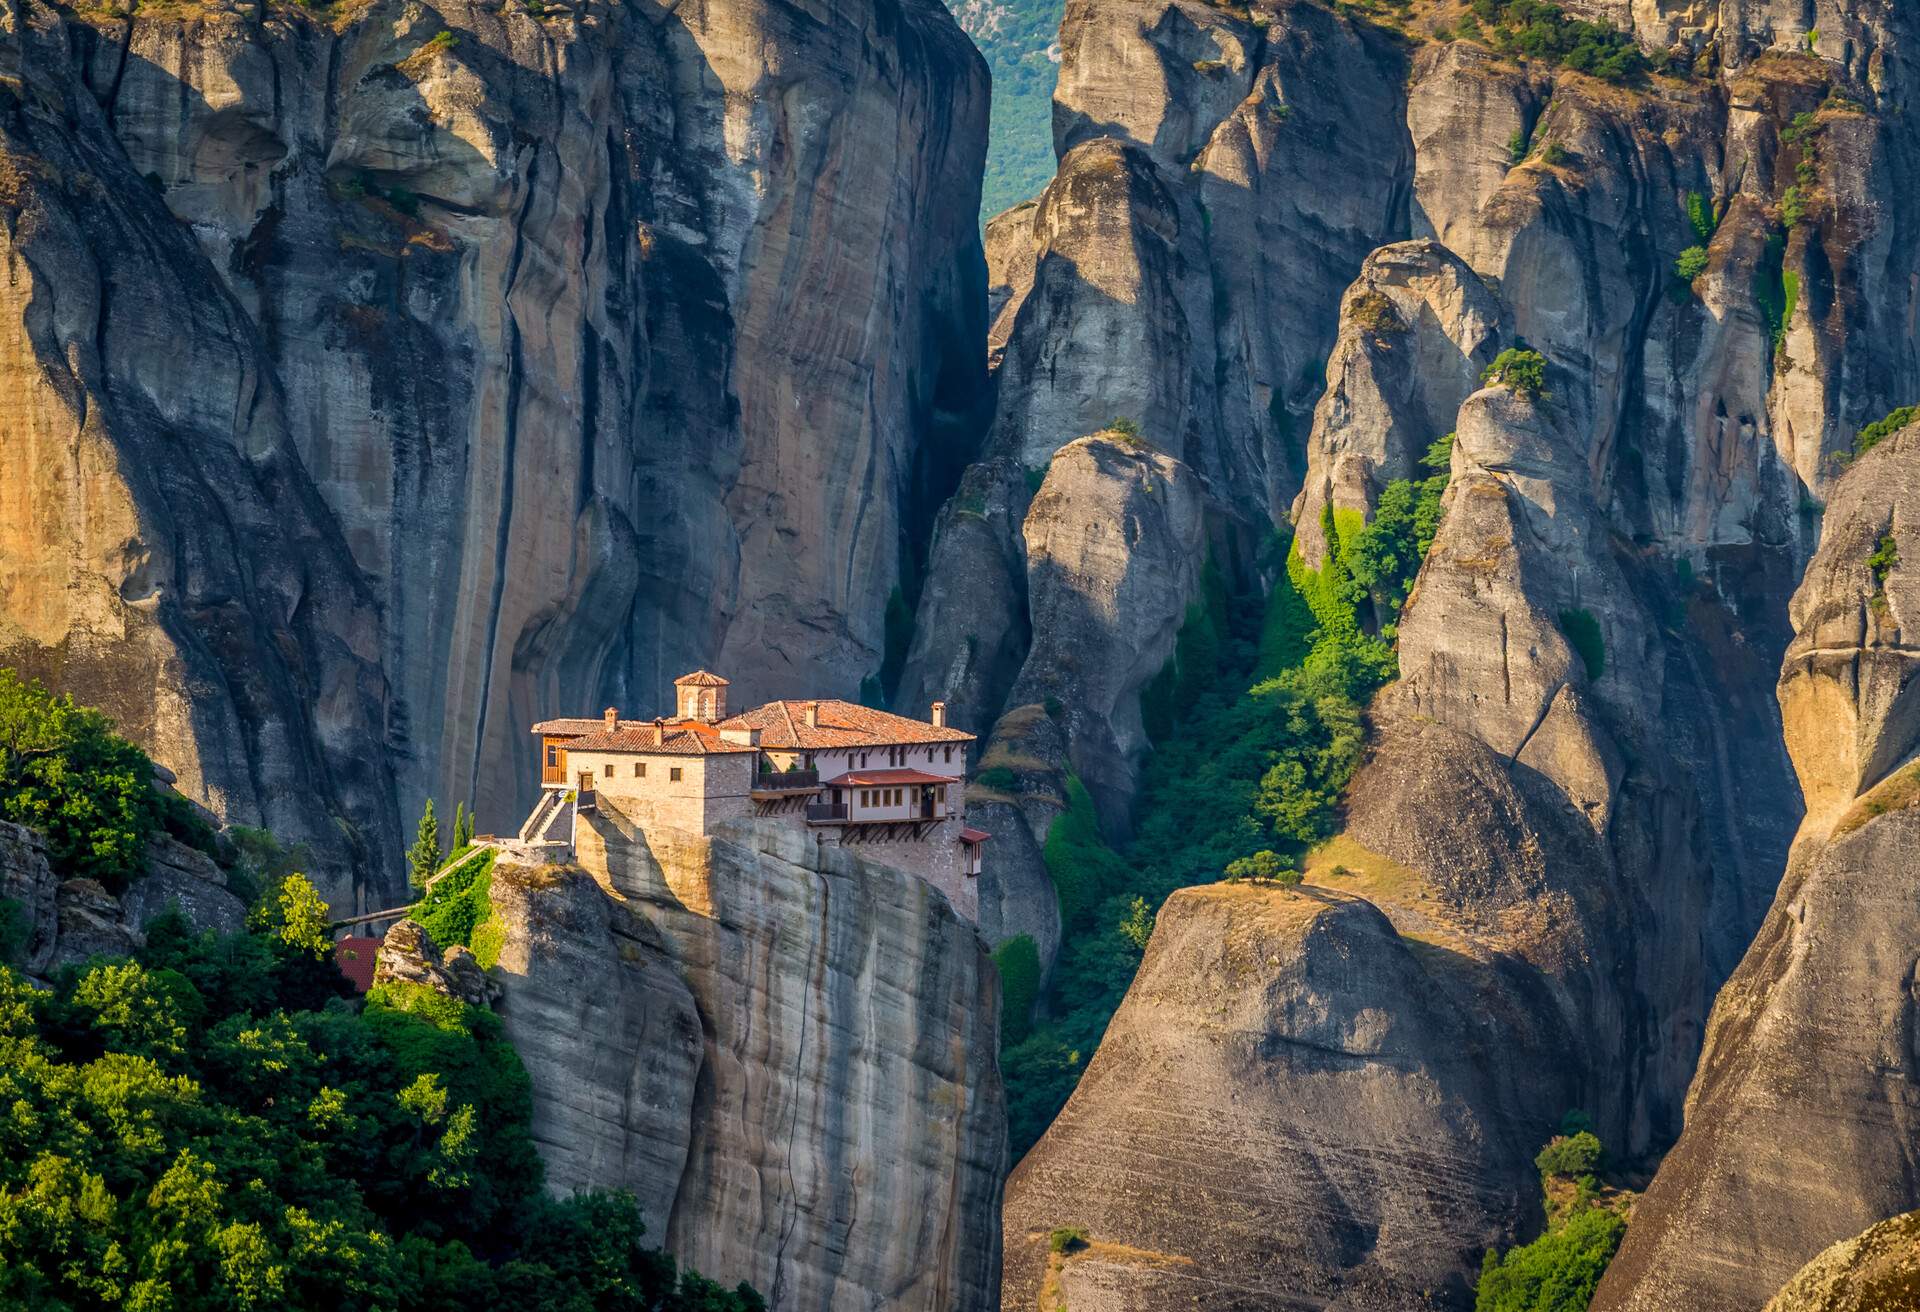 A majestic monastery sits atop a steep rock formation, set against a stunning backdrop of tall, sheer rock cliffs.